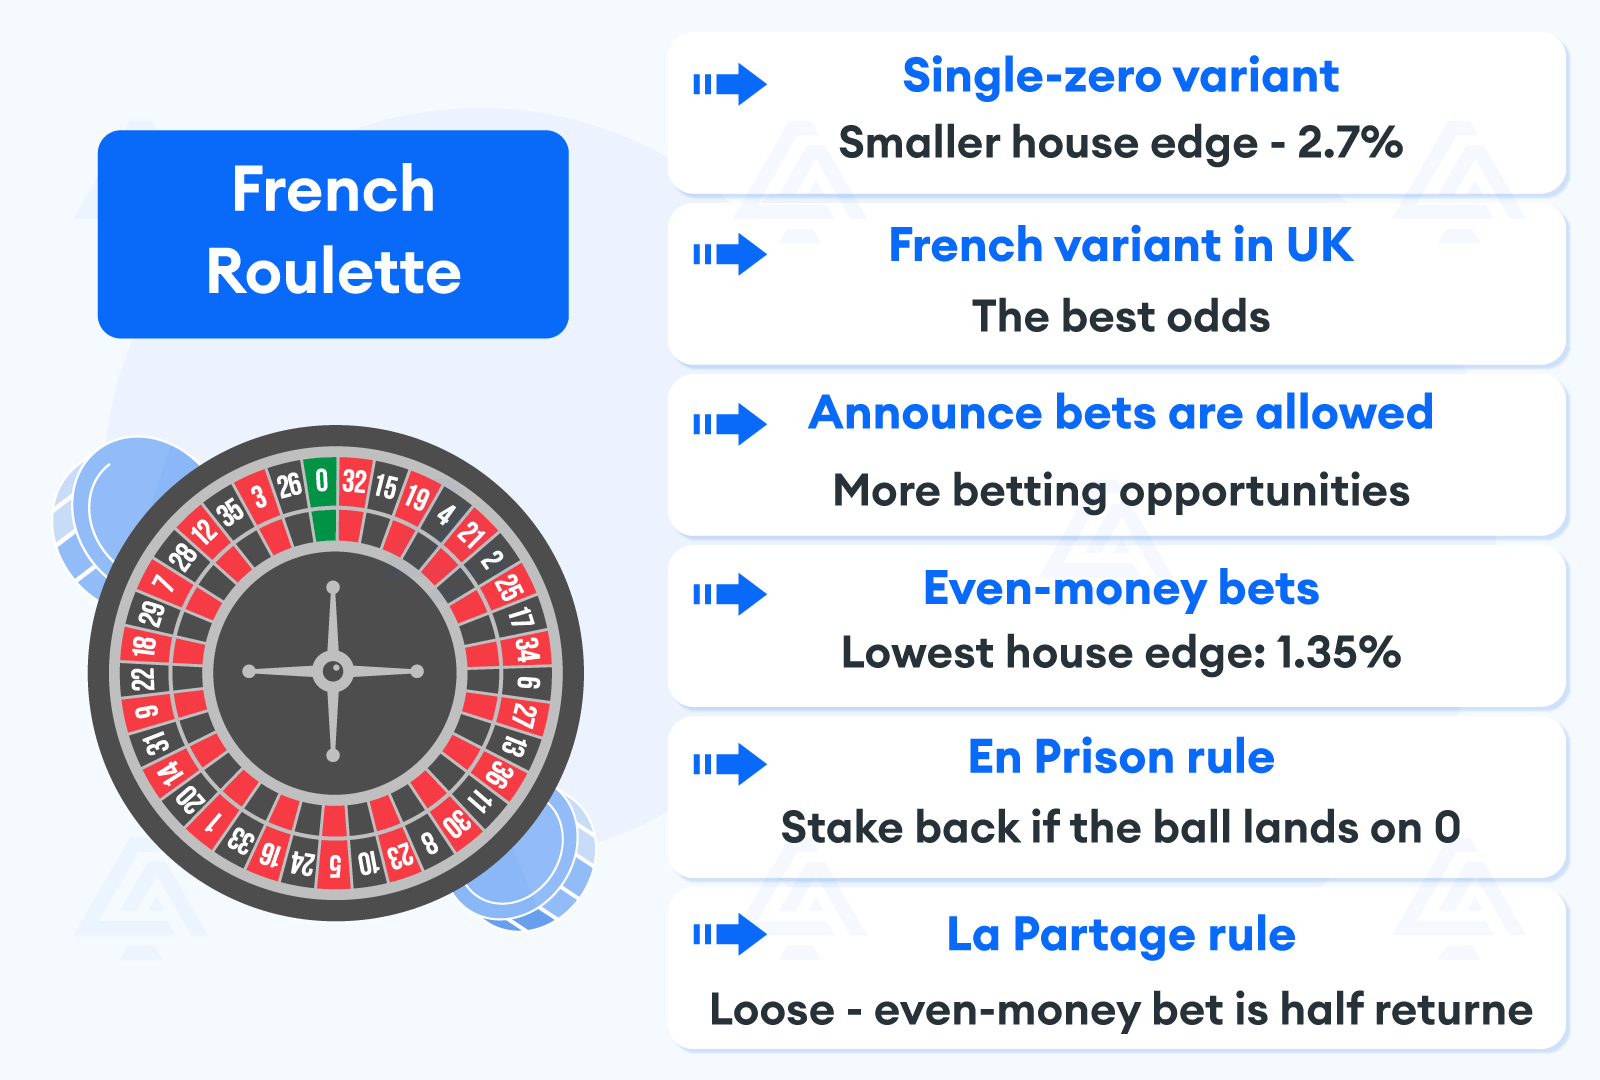 Most profitable Roulette wheels - French Roulette is your best option